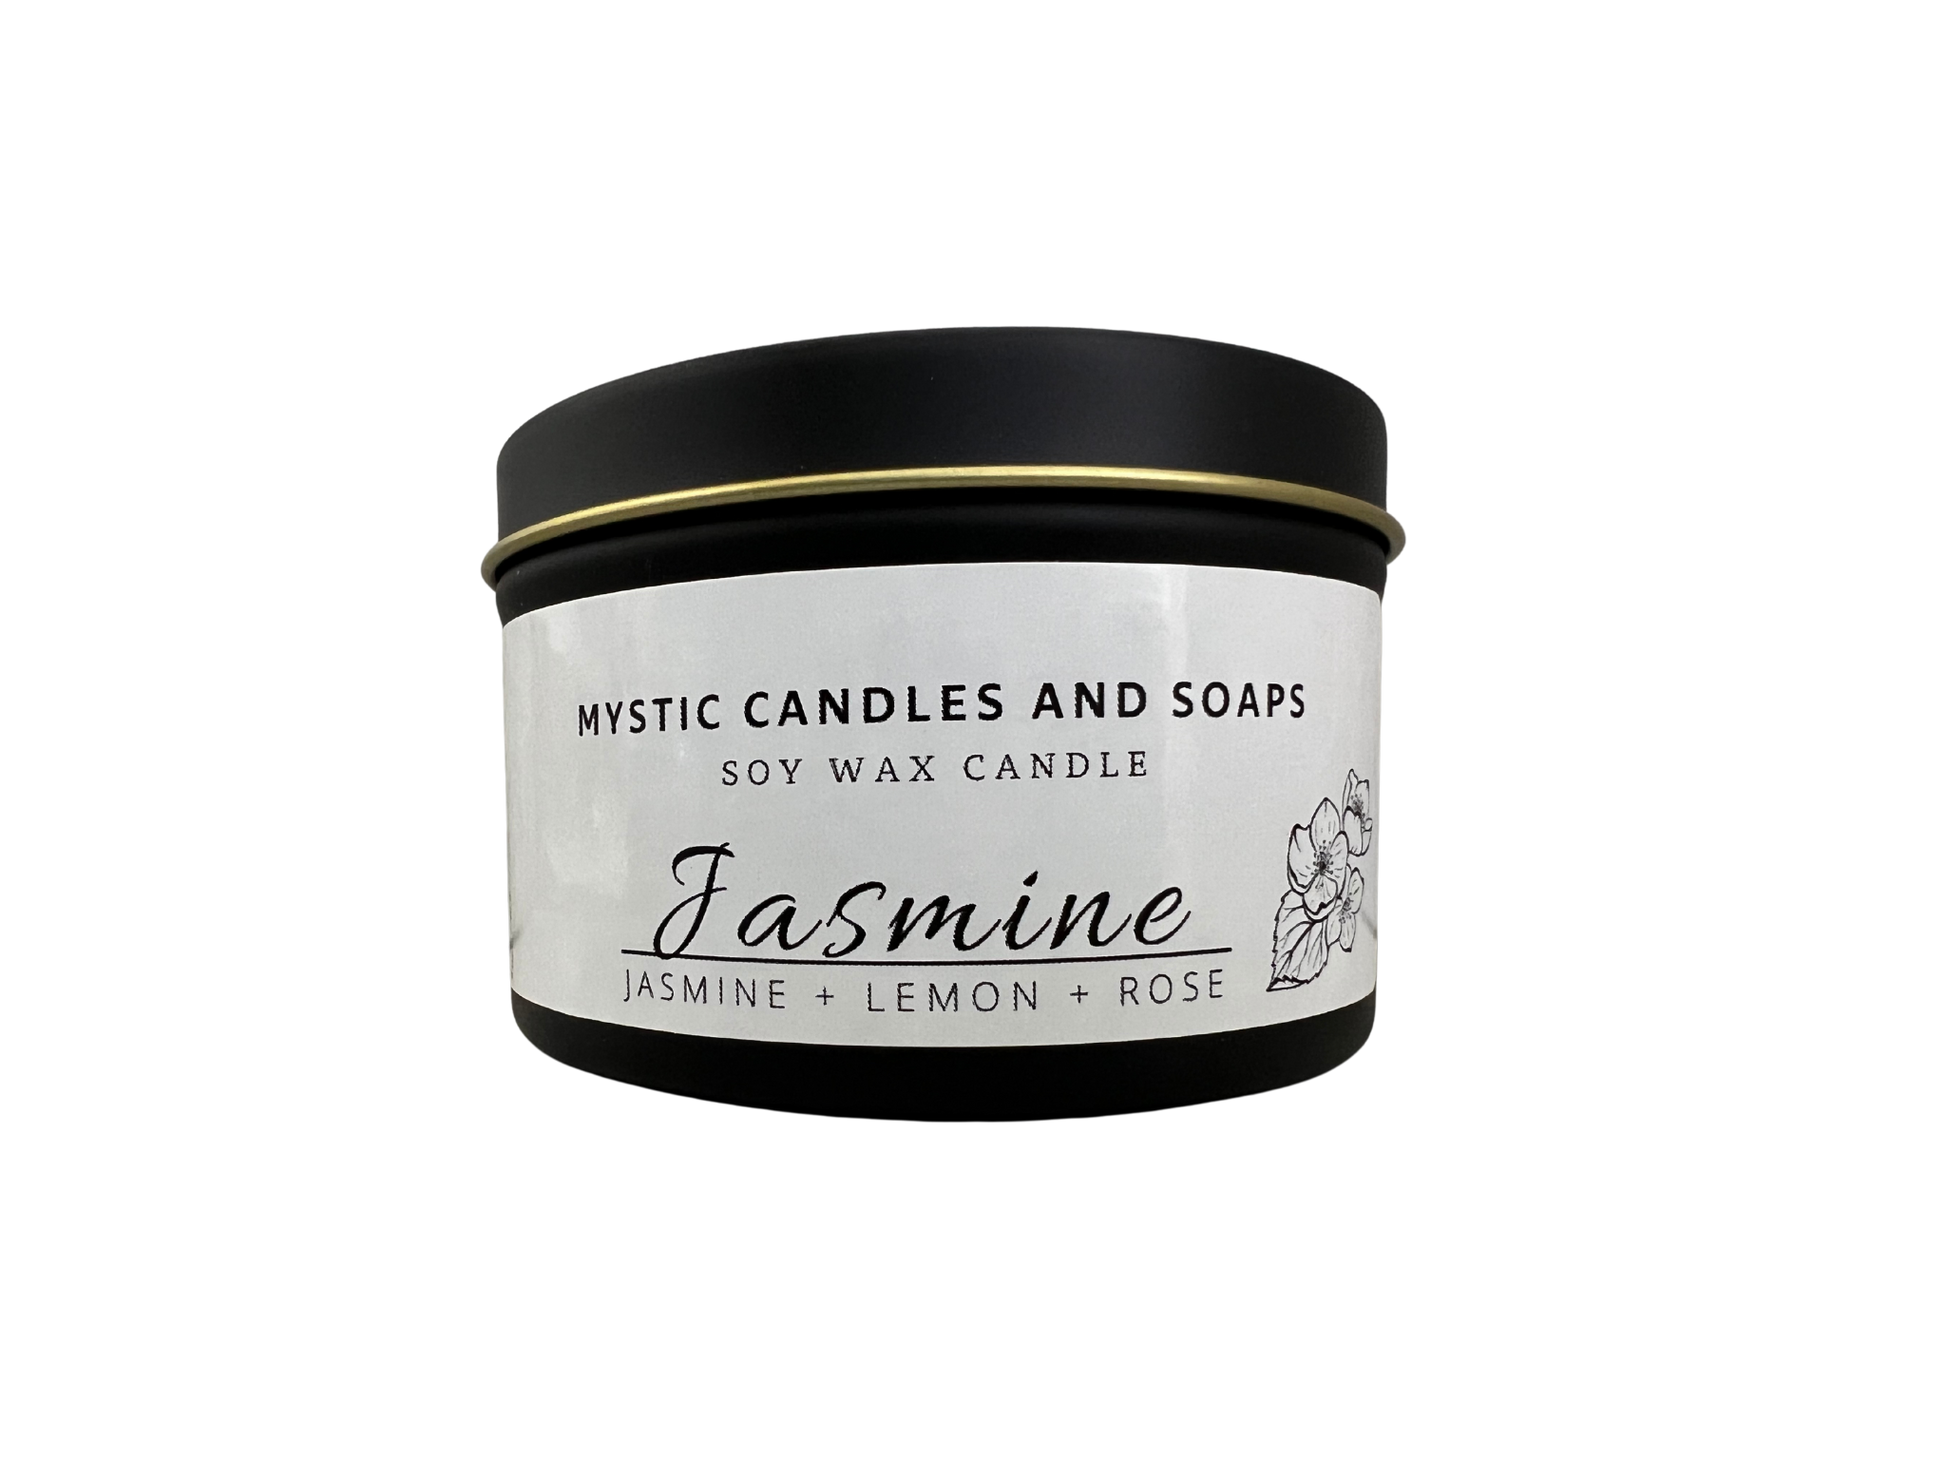 Jasmine Flameless Candle - Mystic Candles and Soaps LLC